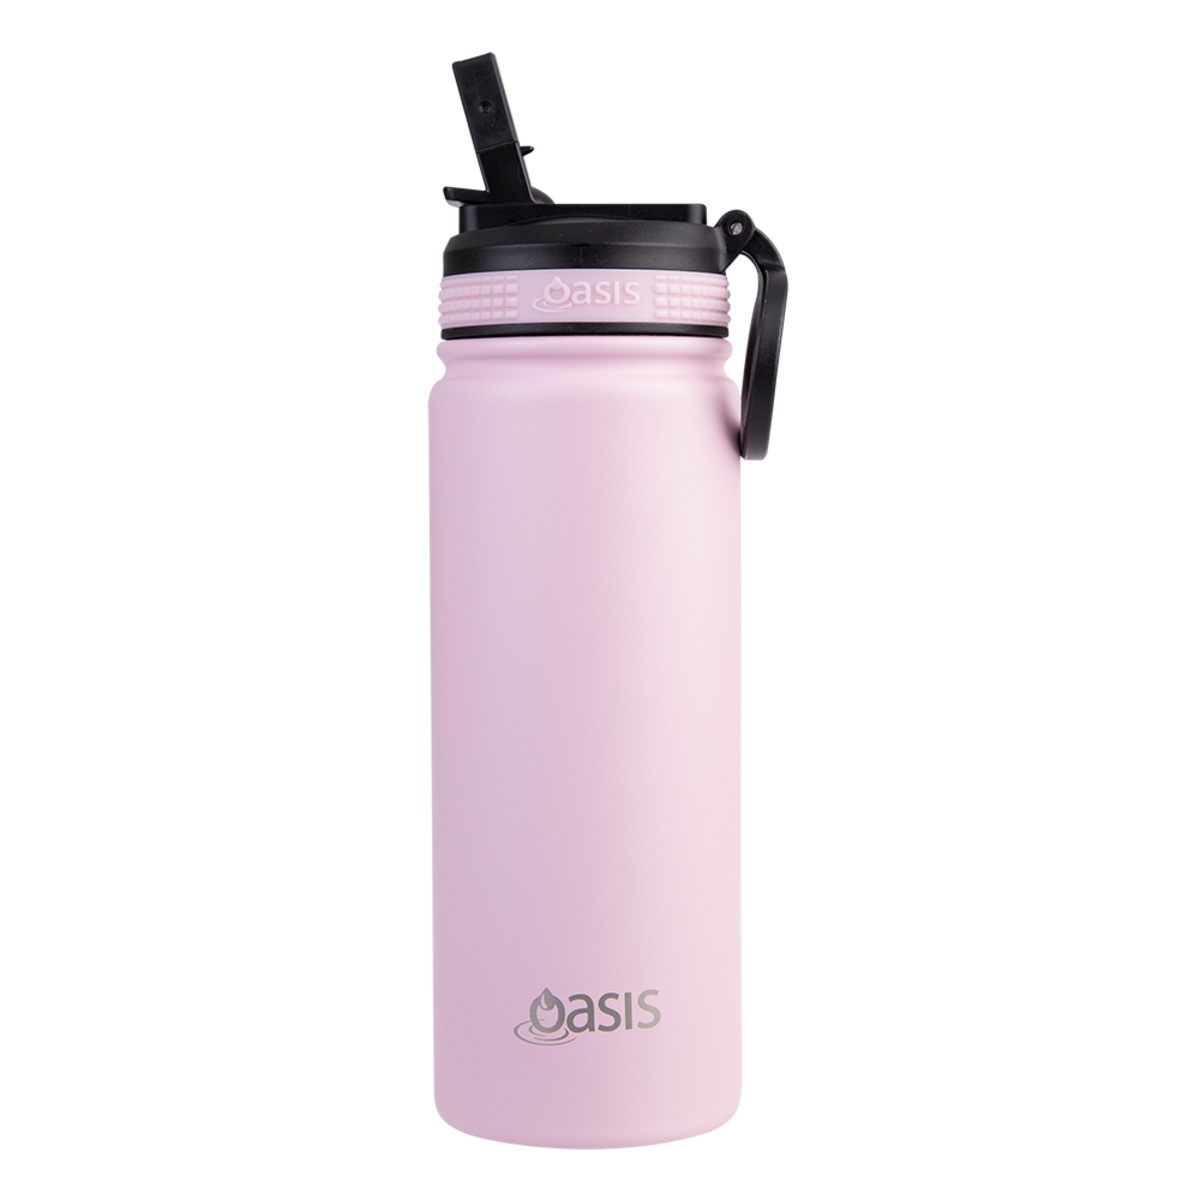 OASIS STAINLESS STEEL DOUBLE WALL INSULATED "CHALLENGER" SPORTS BOTTLE W/ SIPPER STRAW 550ML - Carnation